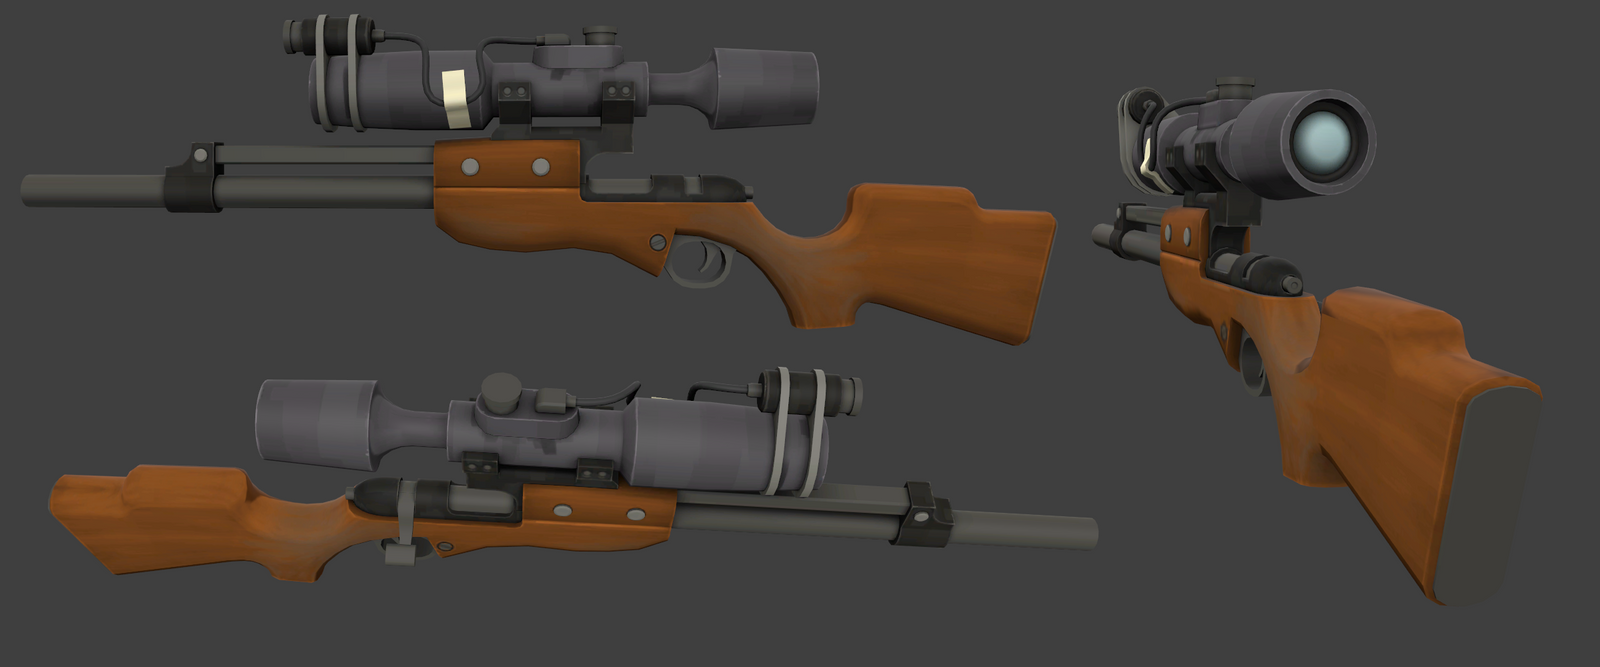 tf2_sniper_rifle_texturing_by_elbagast-d3972o9.png